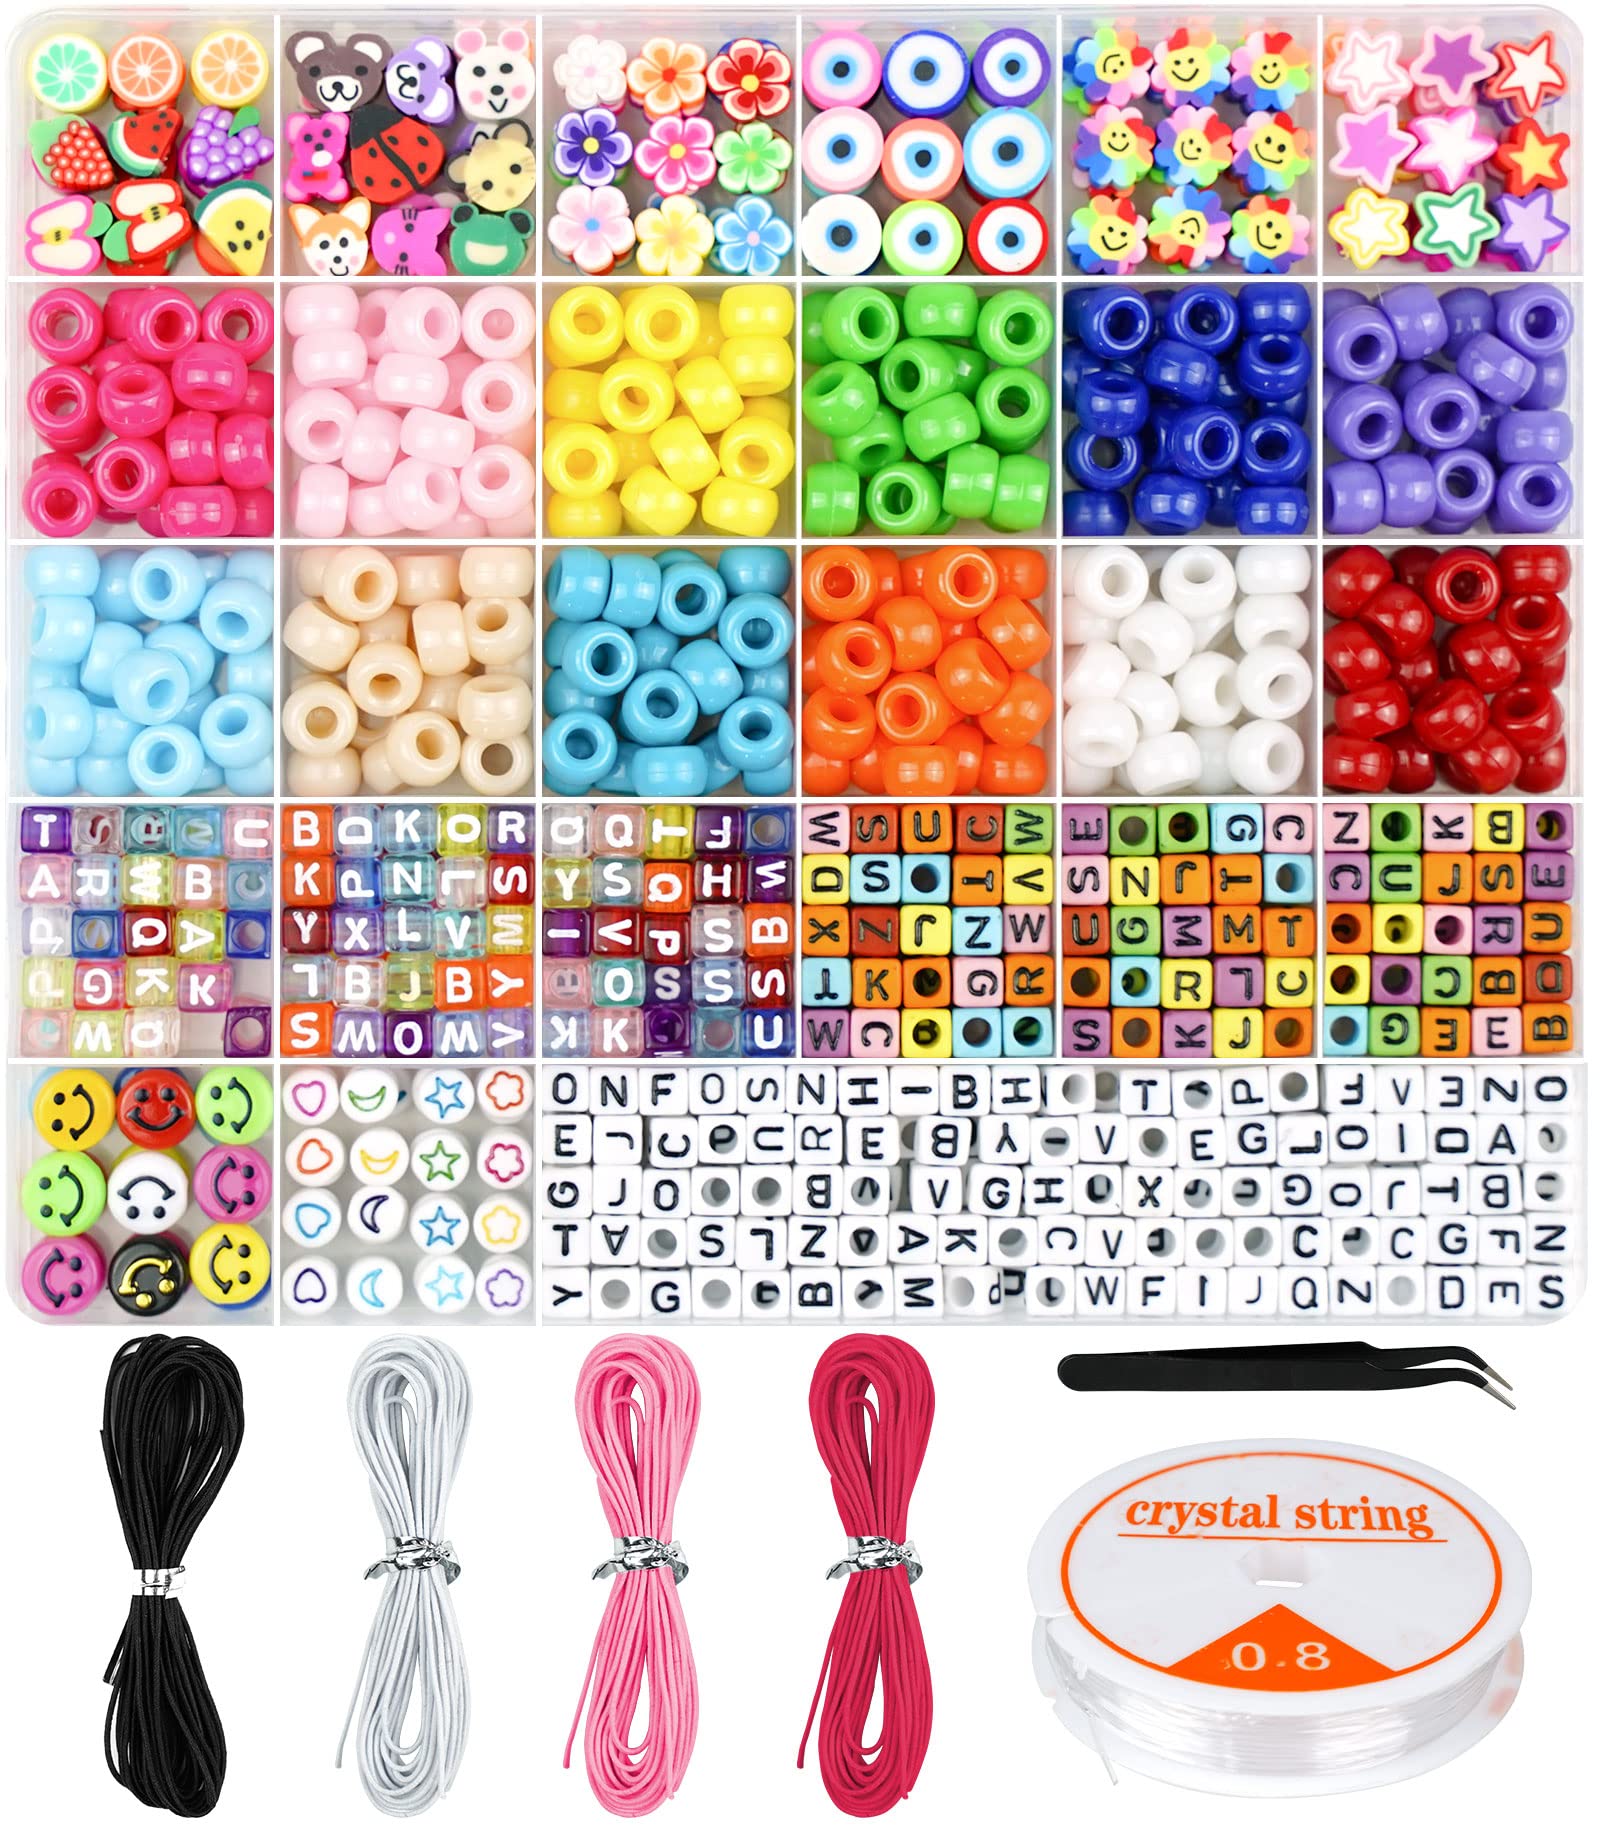 Dowsabel Bracelet Making Kit Beads for Bracelets Making Pony Beads Polymer  Clay Beads Smile Face Beads Letter Beads for Jewelry Making DIY Arts and  Crafts Gifts for Girls Age 6 7 8 9 10-12